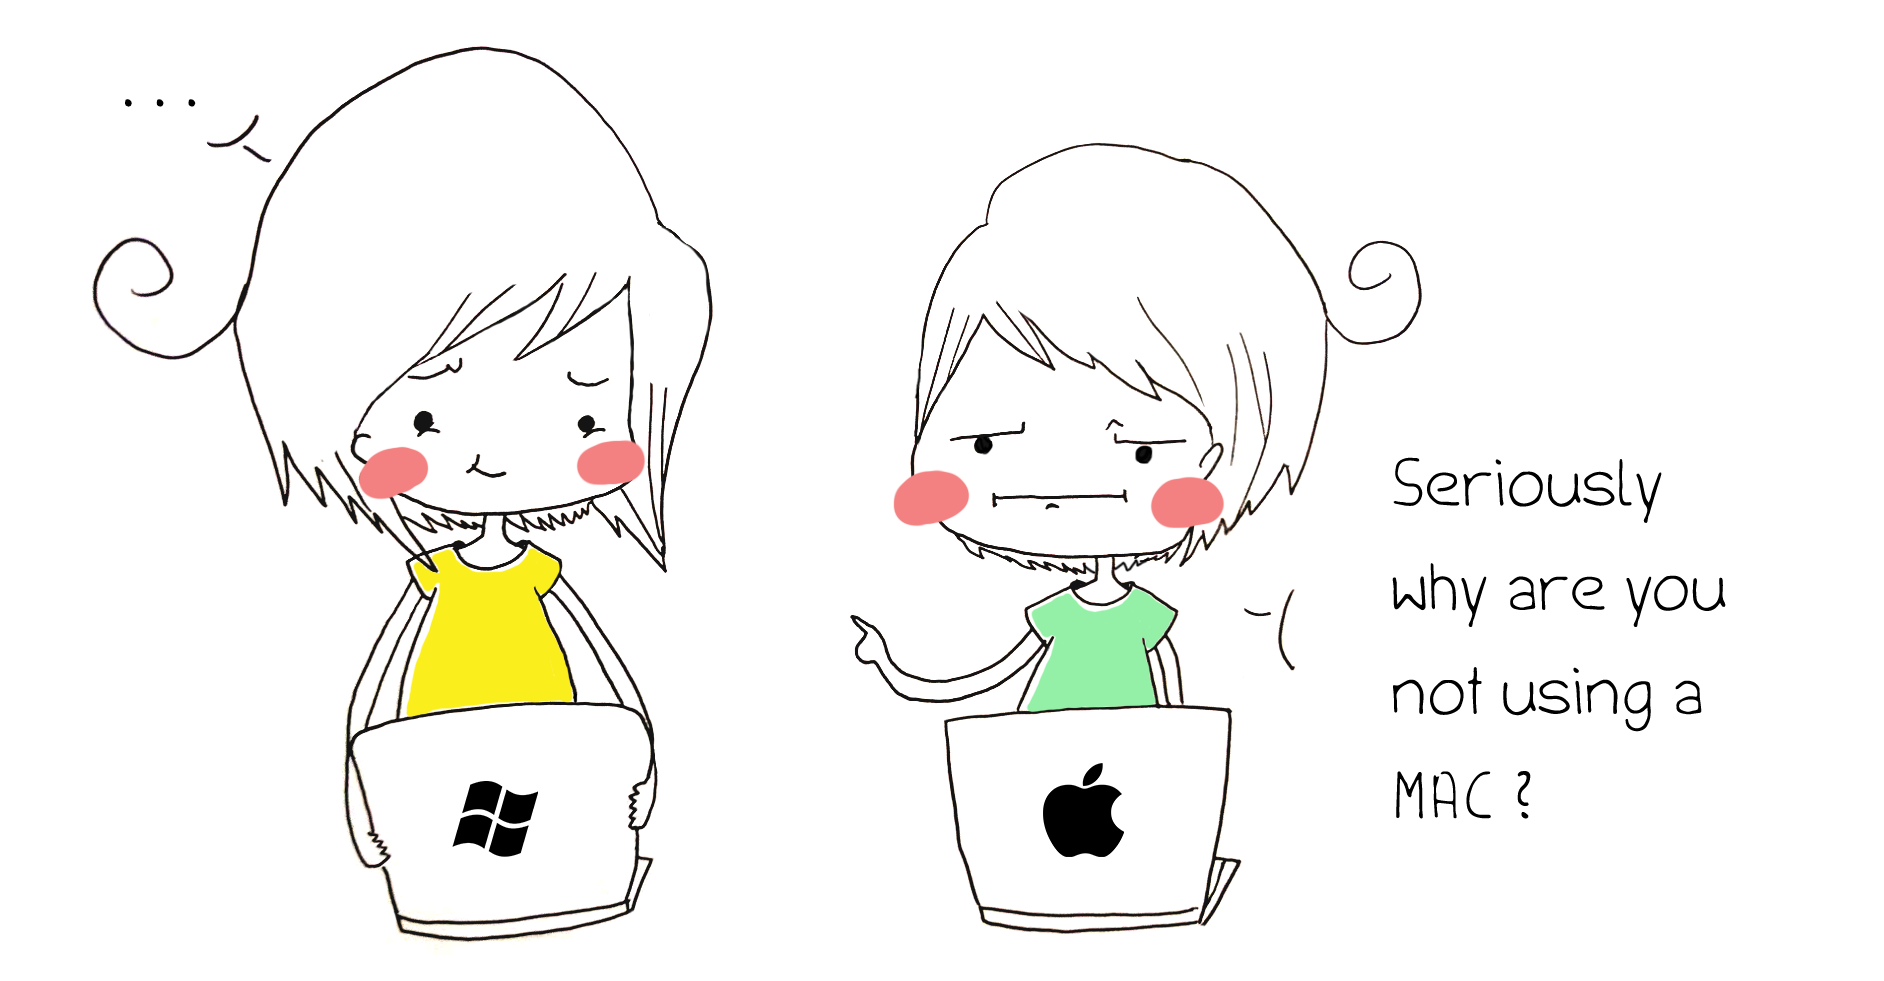 is windows or mac better for coding